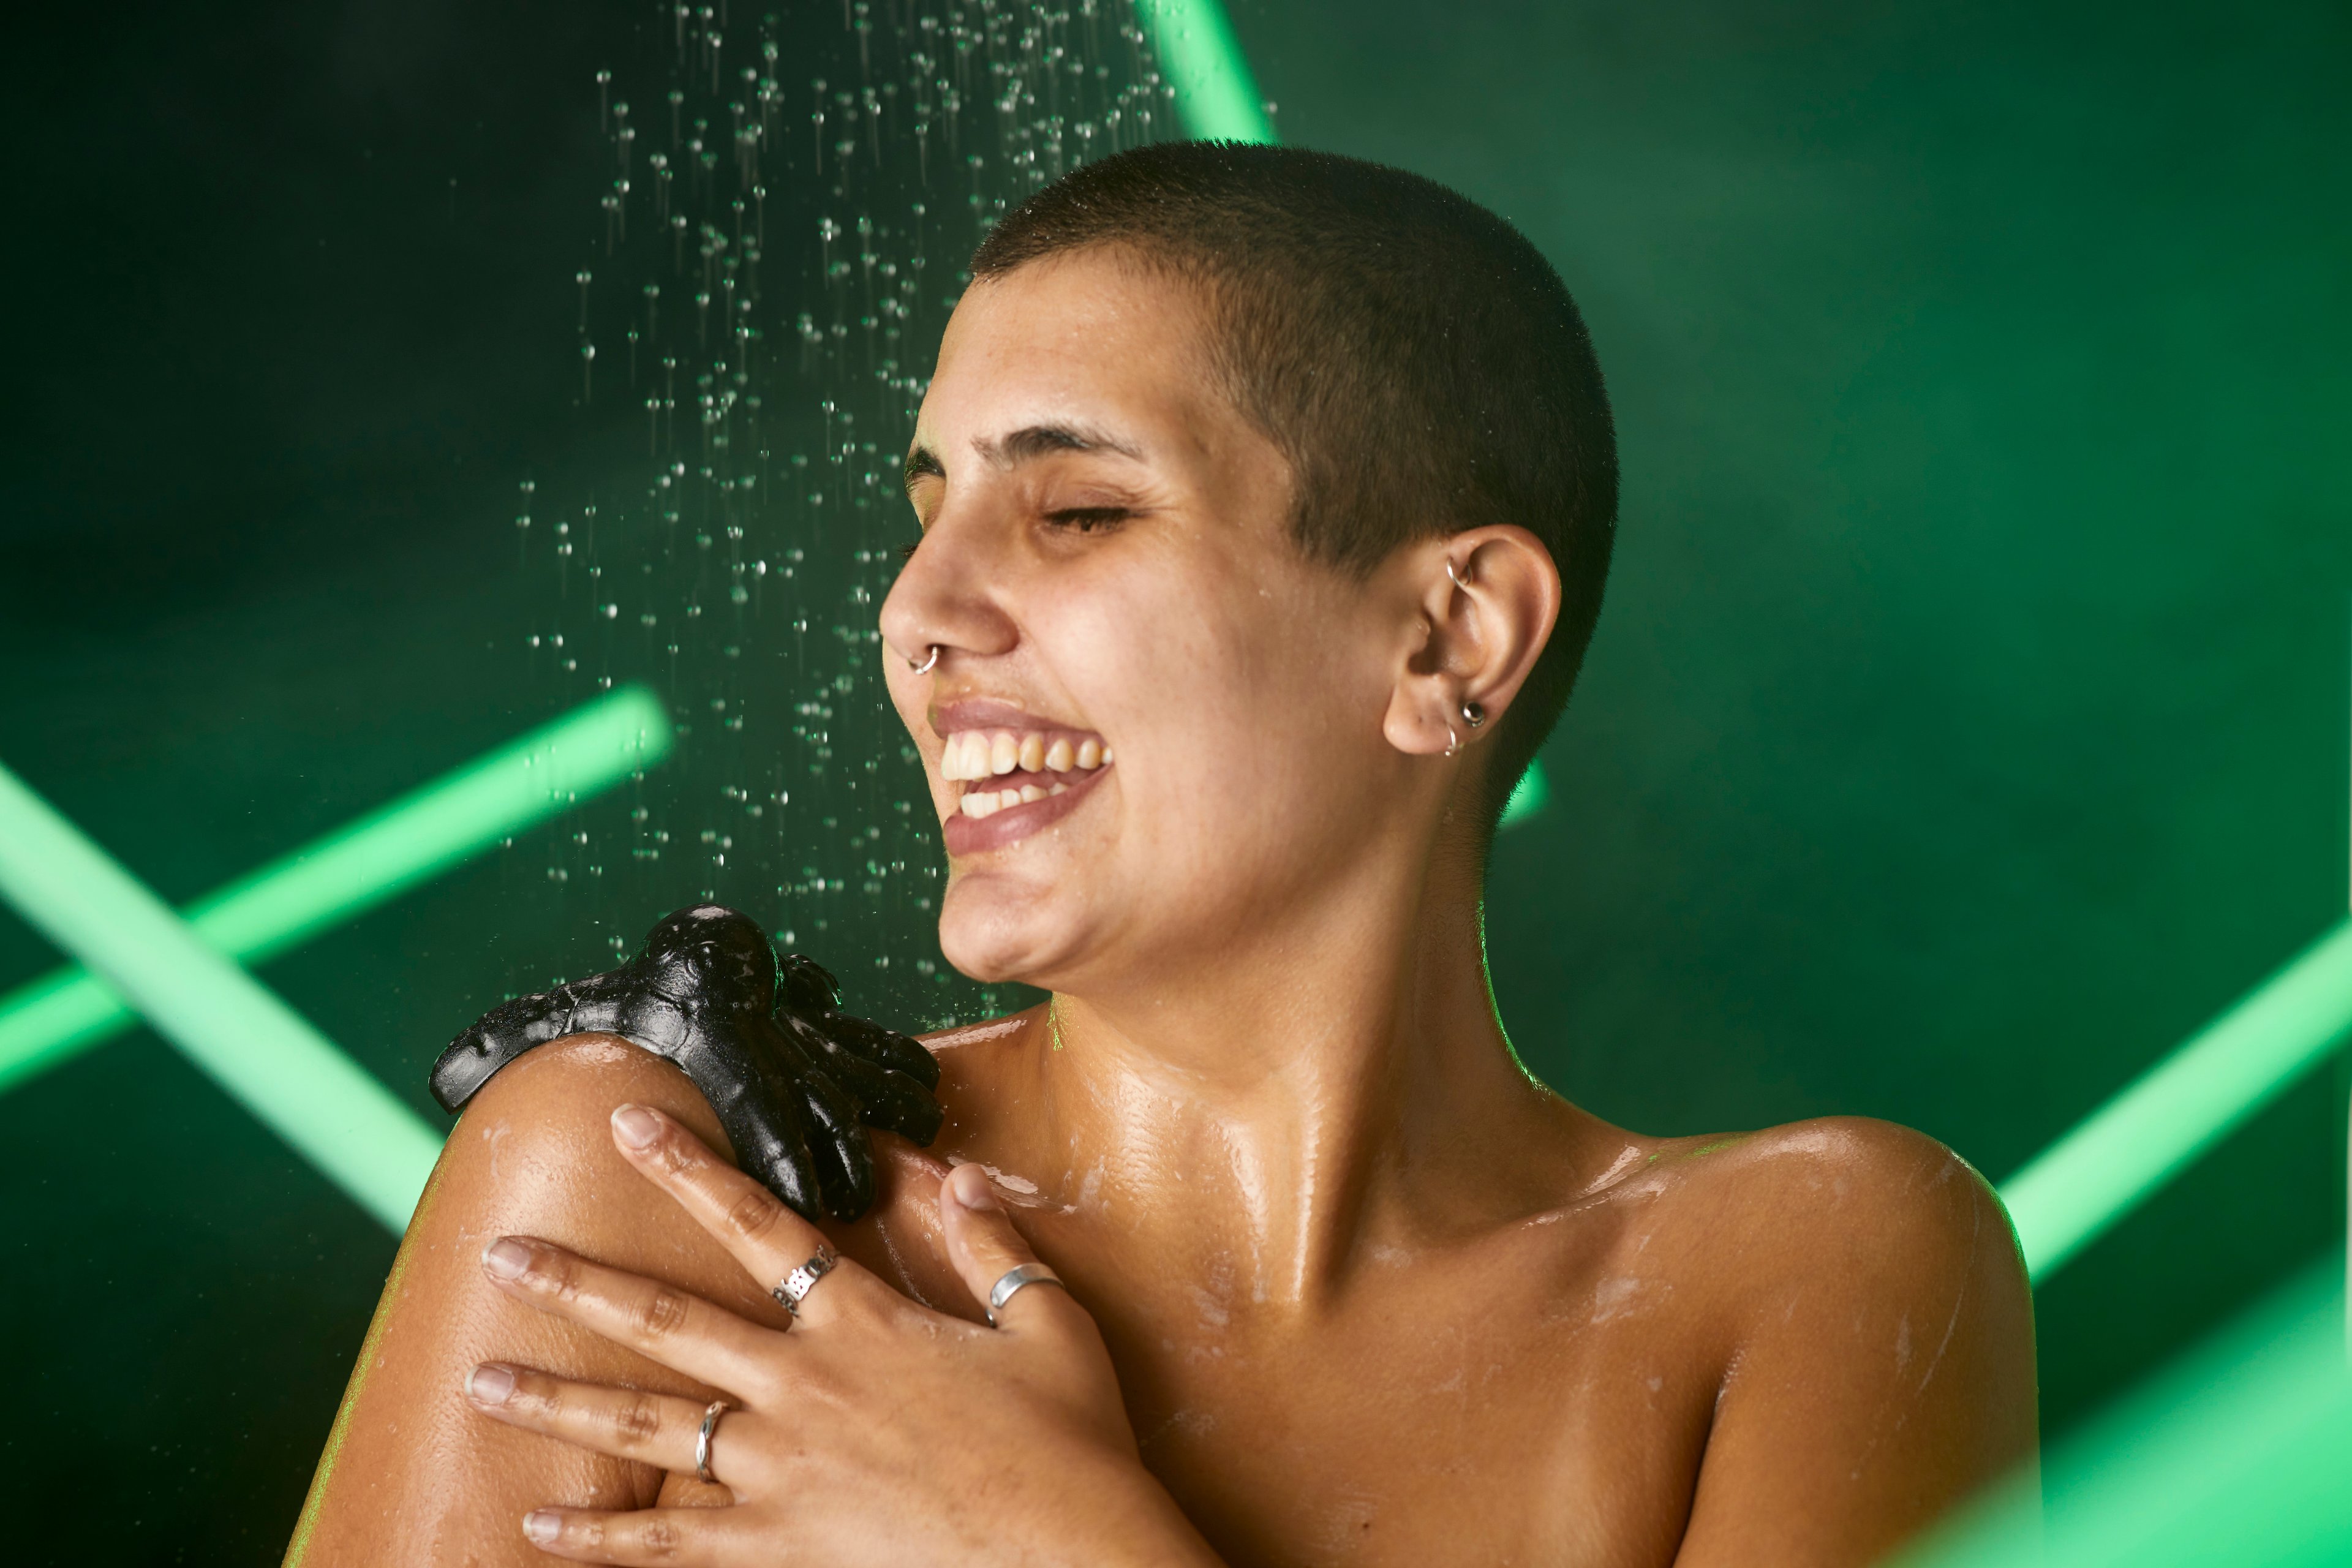 A model smiles in the shower as they balance the Tarantula shower jelly on their shoulder. 